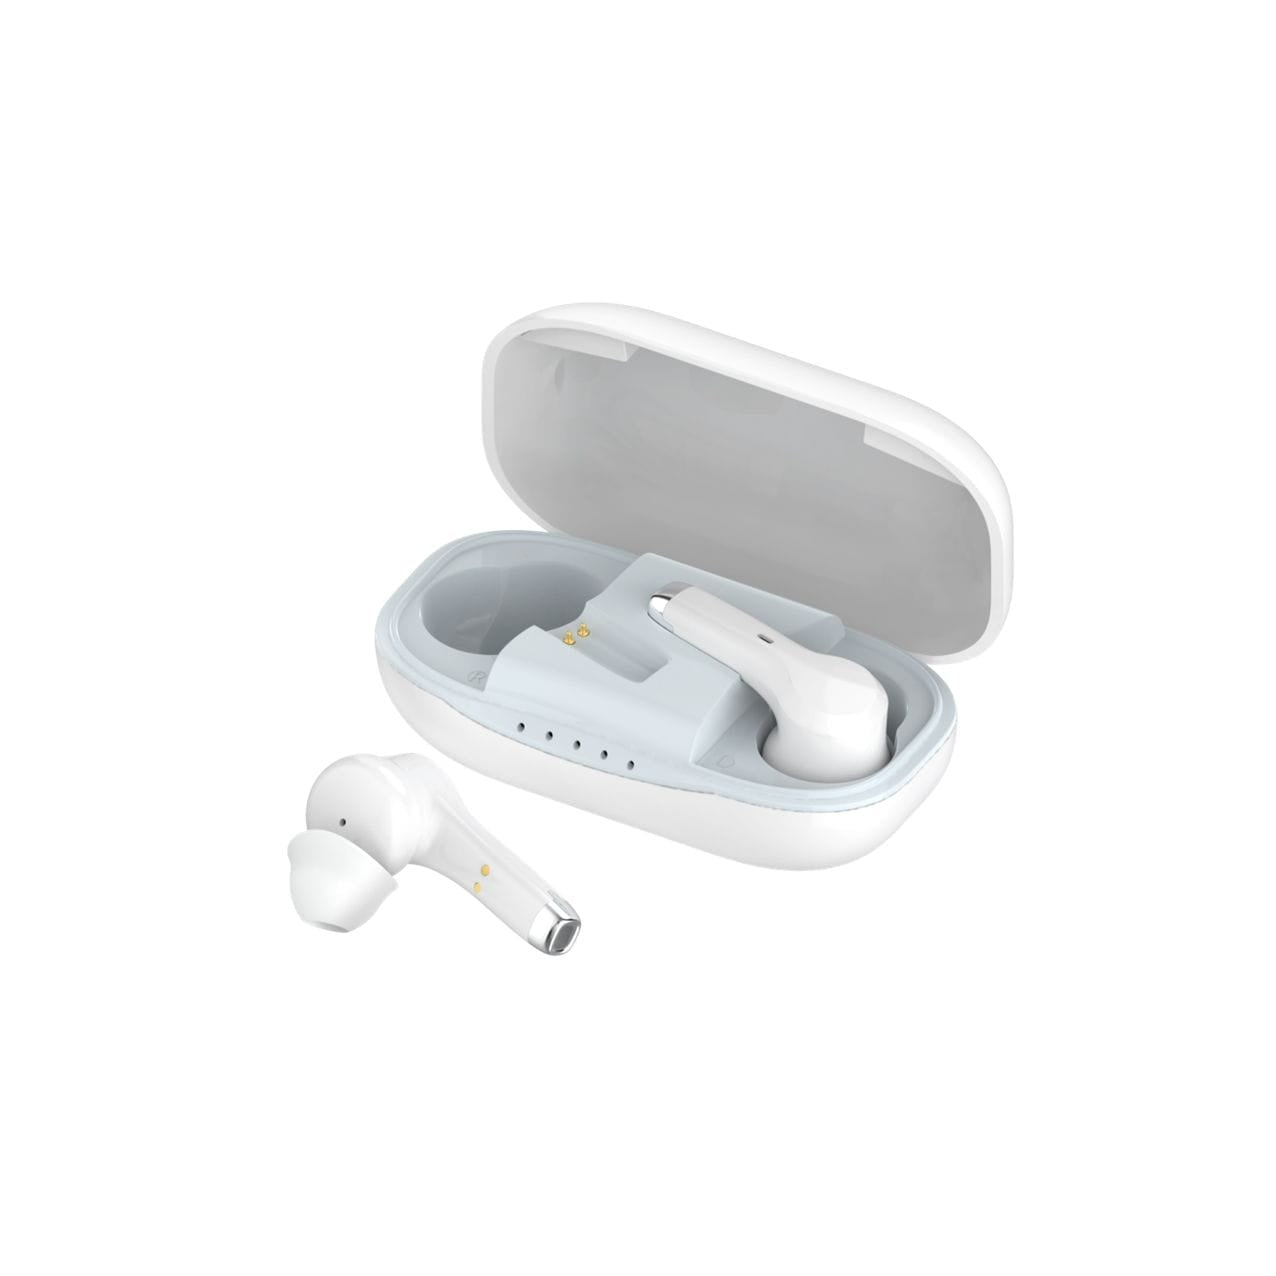 YES, IT'S HEARING AIDS! 2 in One, Hearing Aids and Bluetooth Airpods type Headphones.  eEAR-BT-TWS-AP Airpod style hearing aids, very discreet, doesn't look like typical hearing aids rather it looks like fashionable Airpods Bluetooth